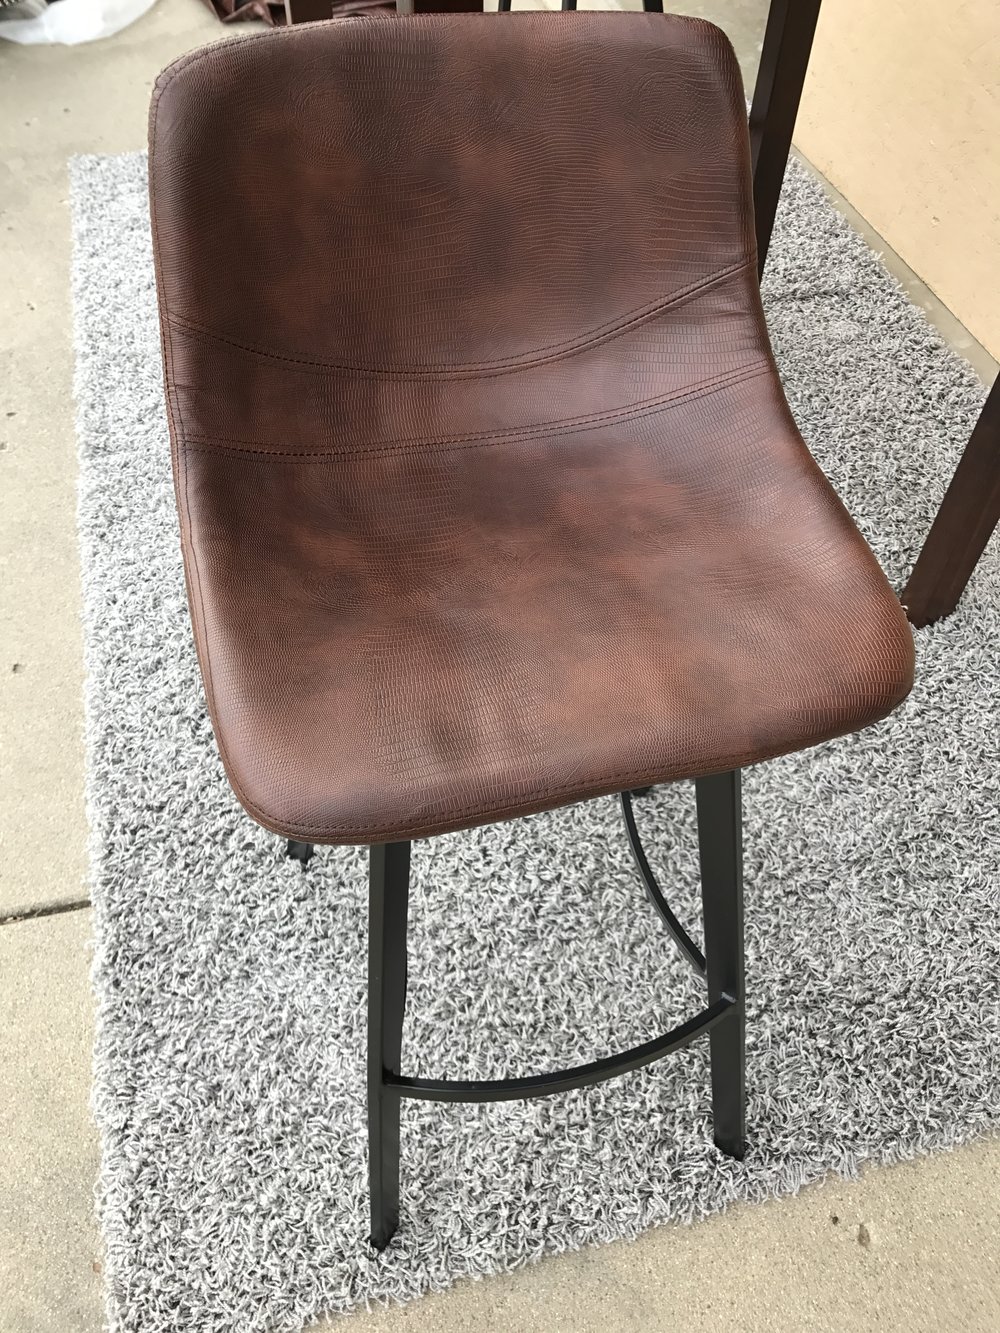 Winsome Solid Wood Parkland Pub Square, Mary Kate Bar Stool